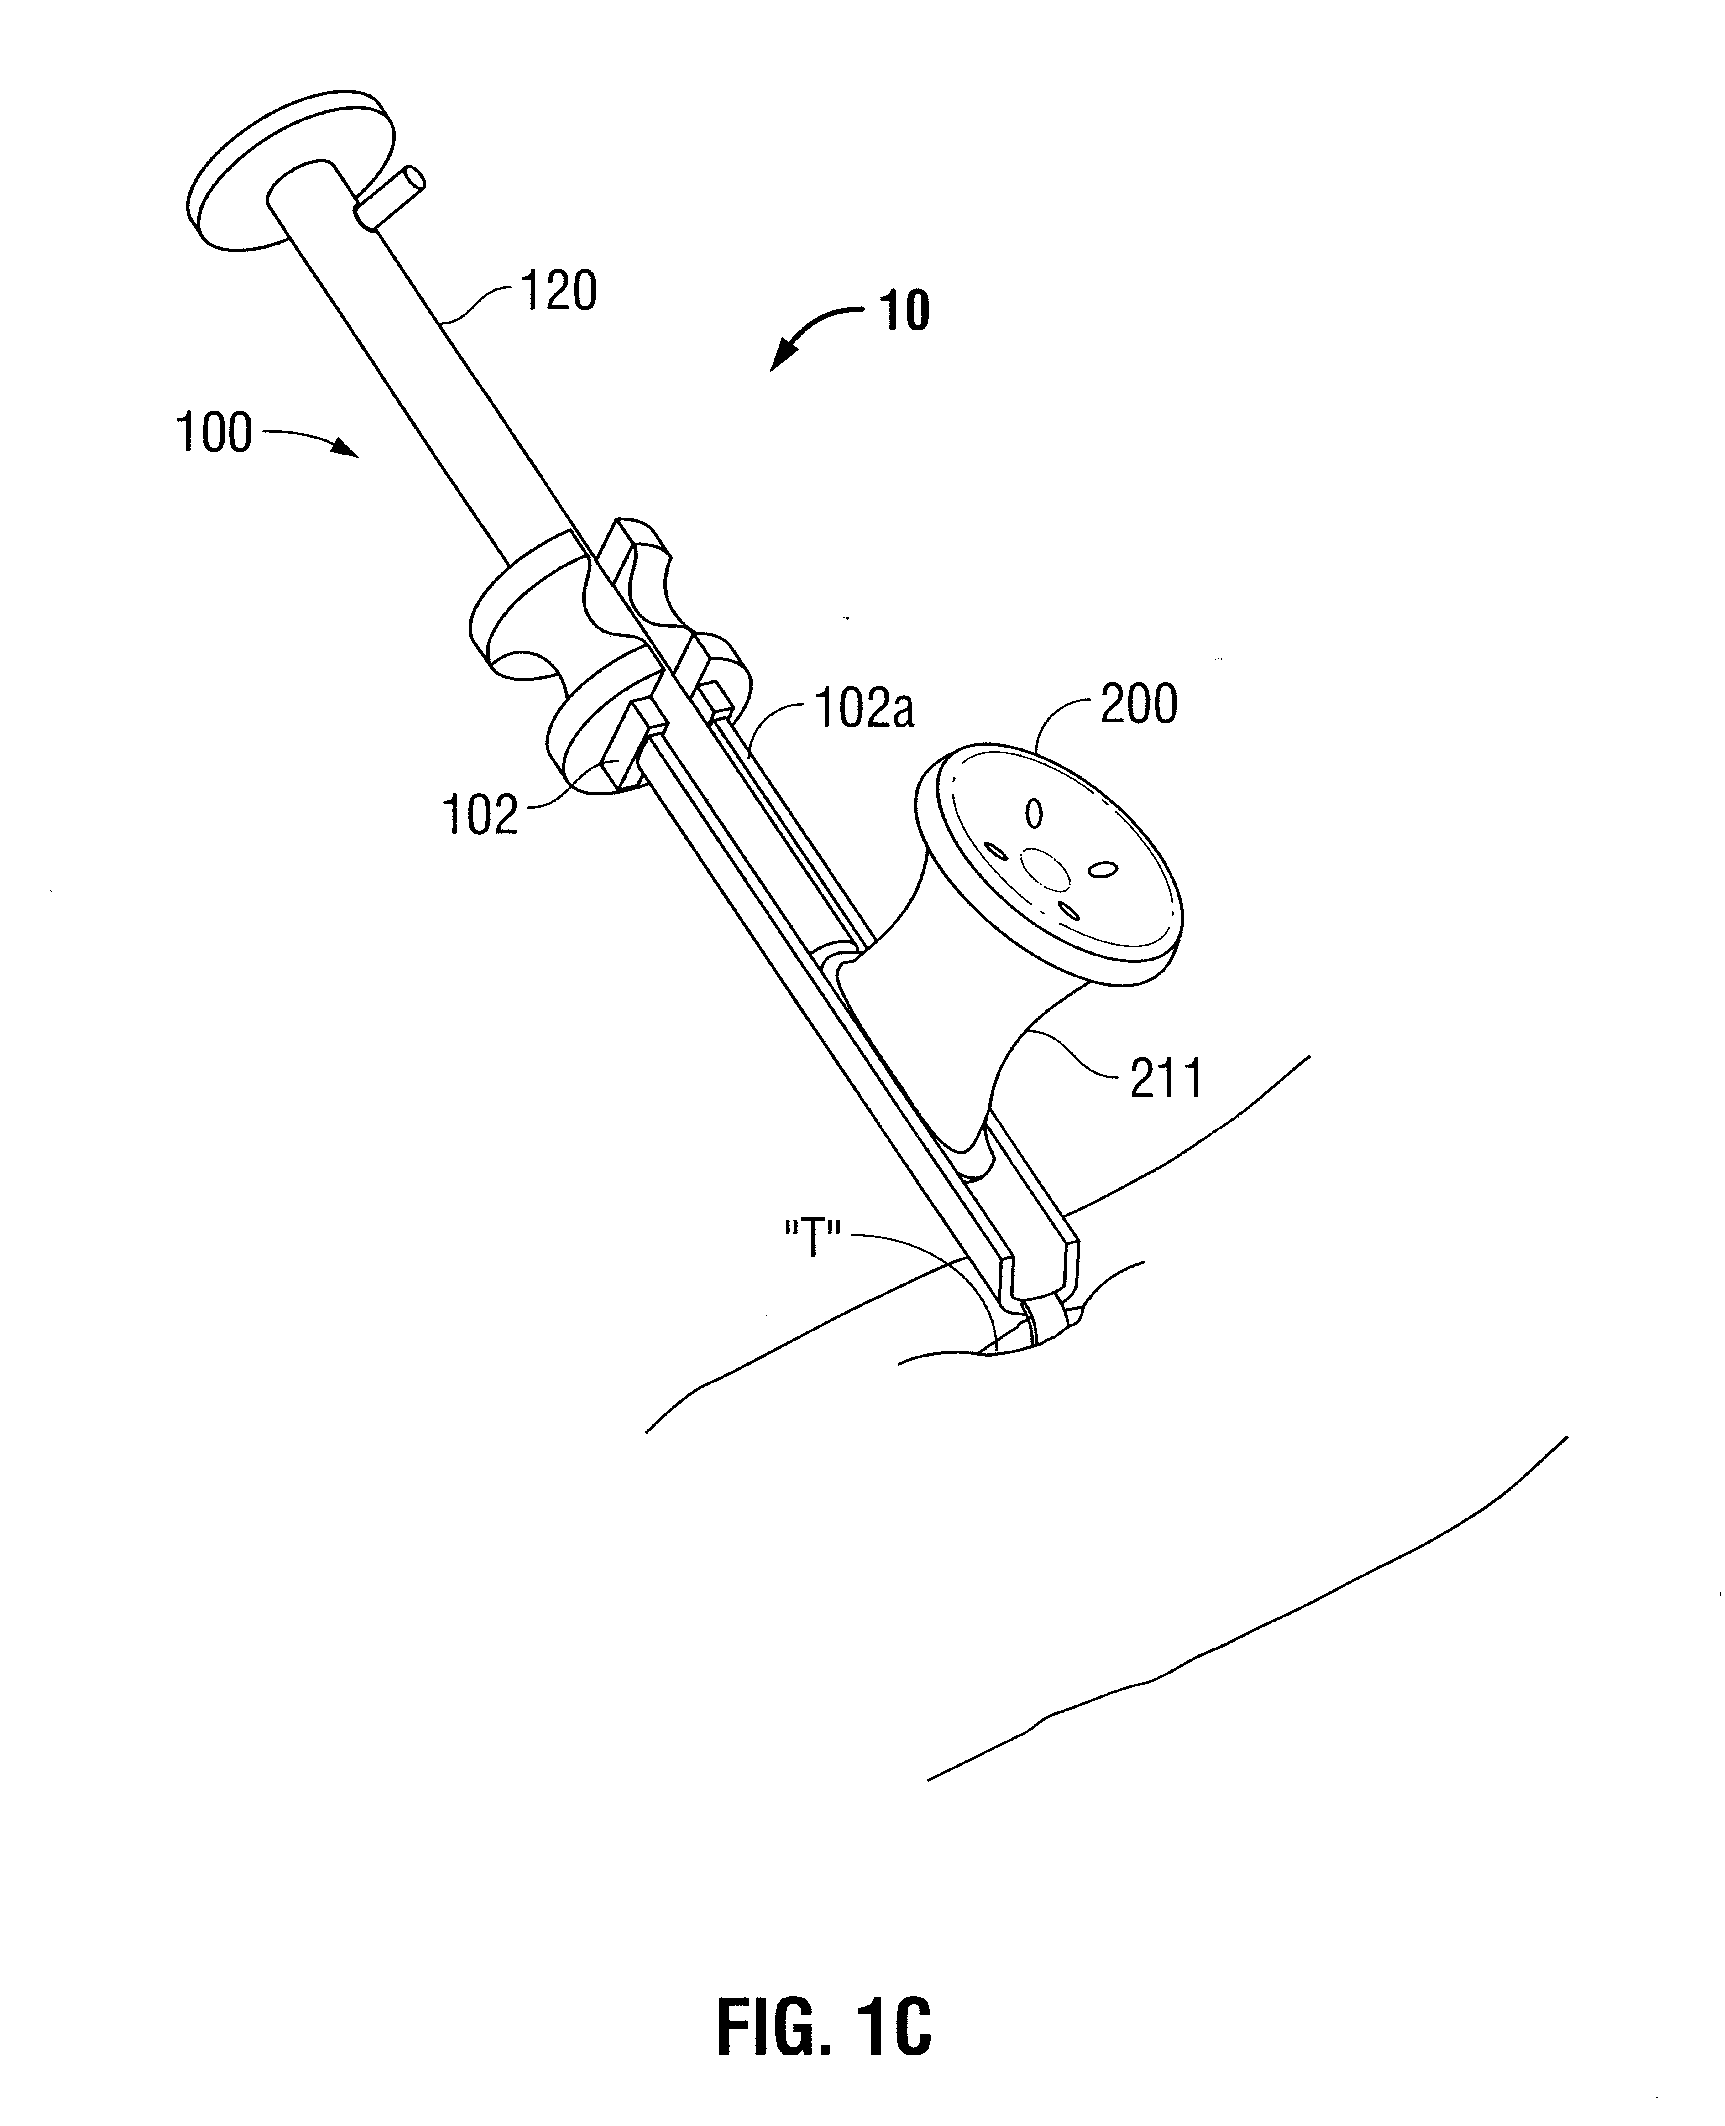 Surgical introducer and access port assembly